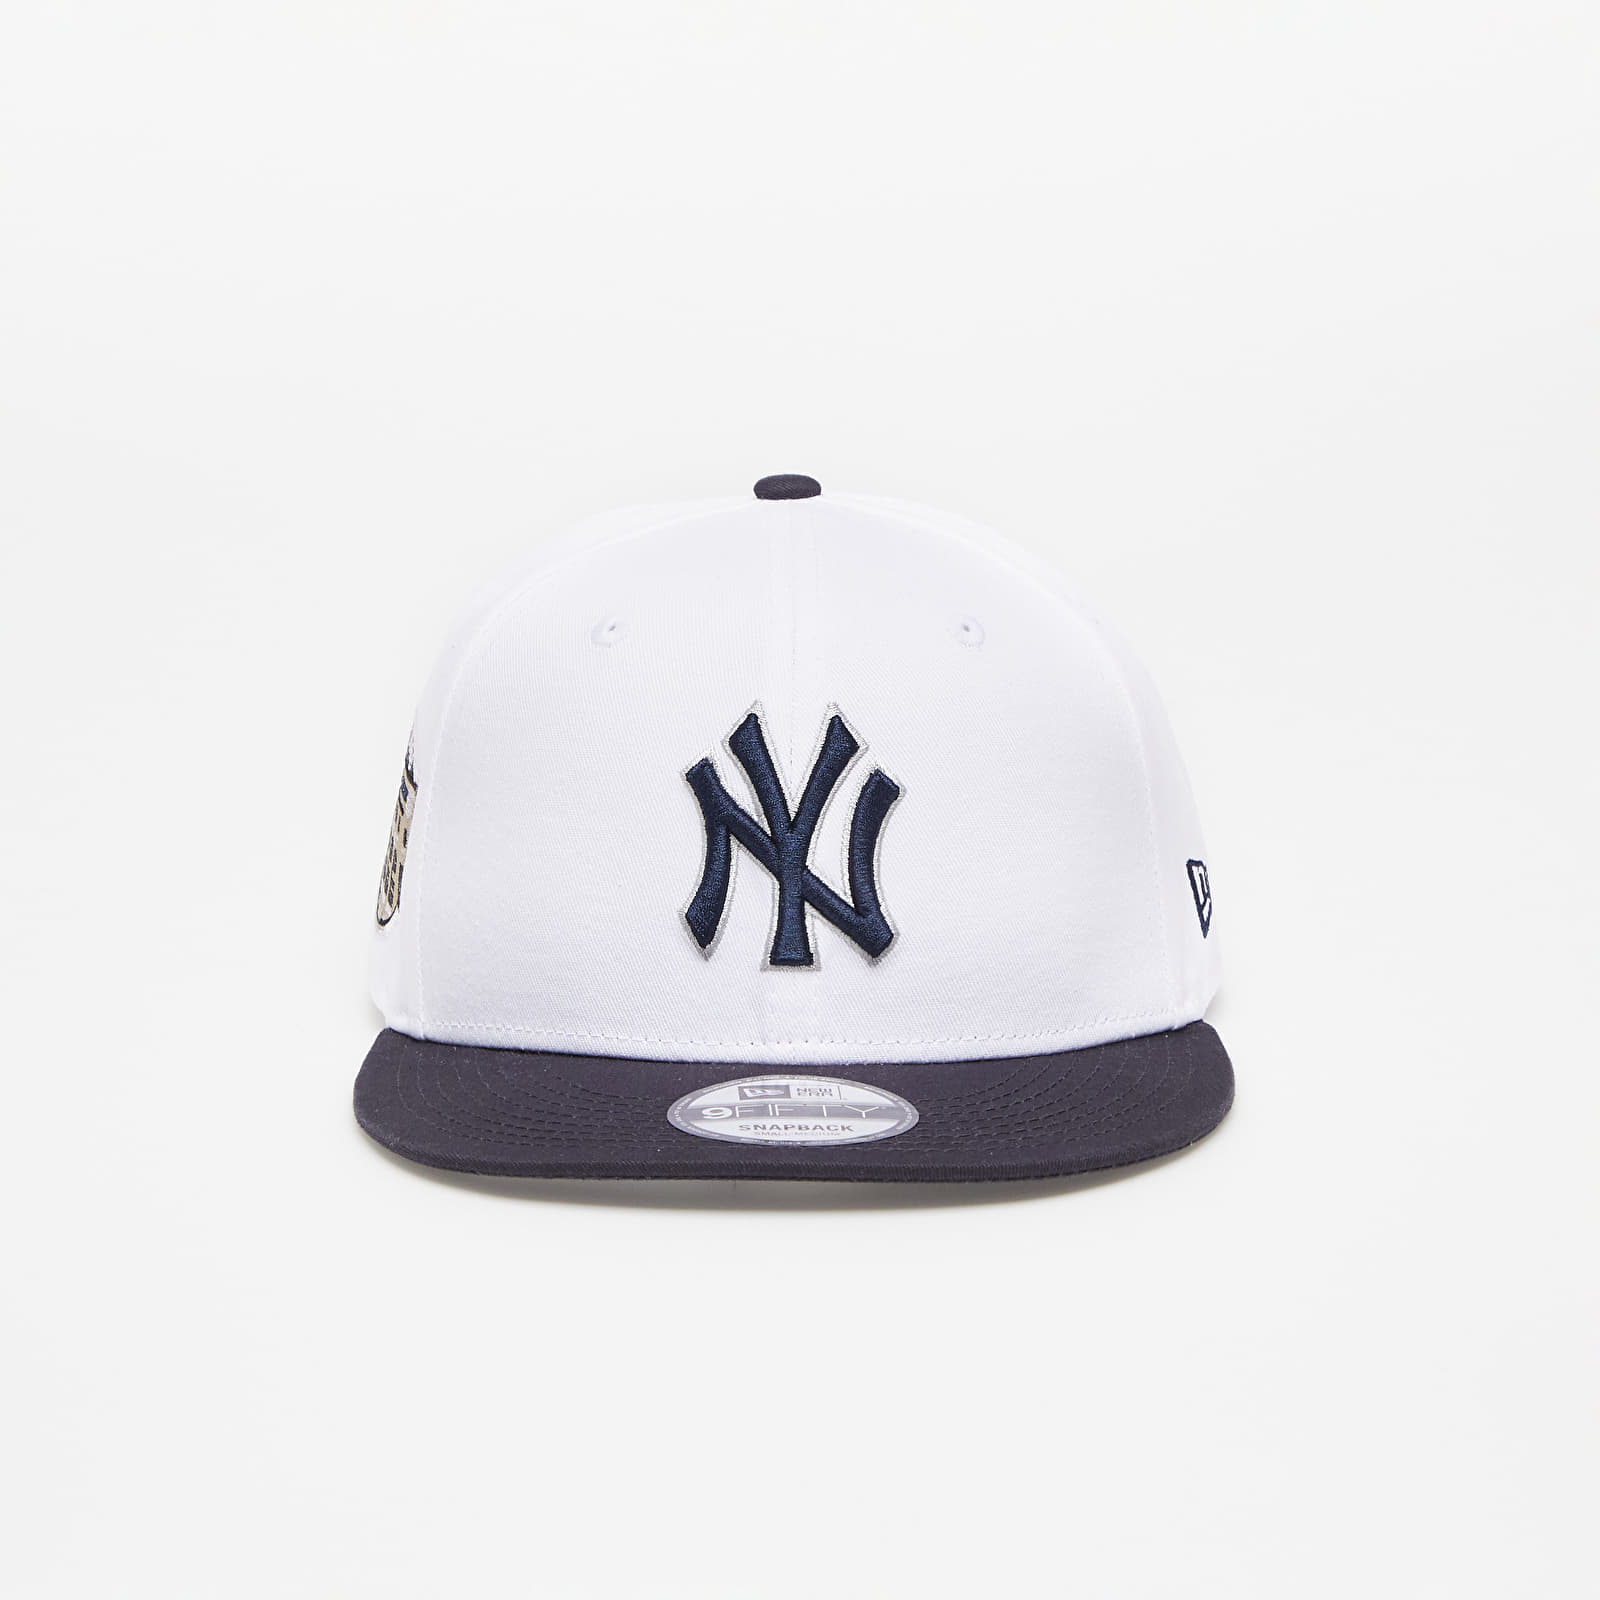 Șepci New Era New York Yankees Crown Patches 9FIFTY Snapback Cap White/ Navy